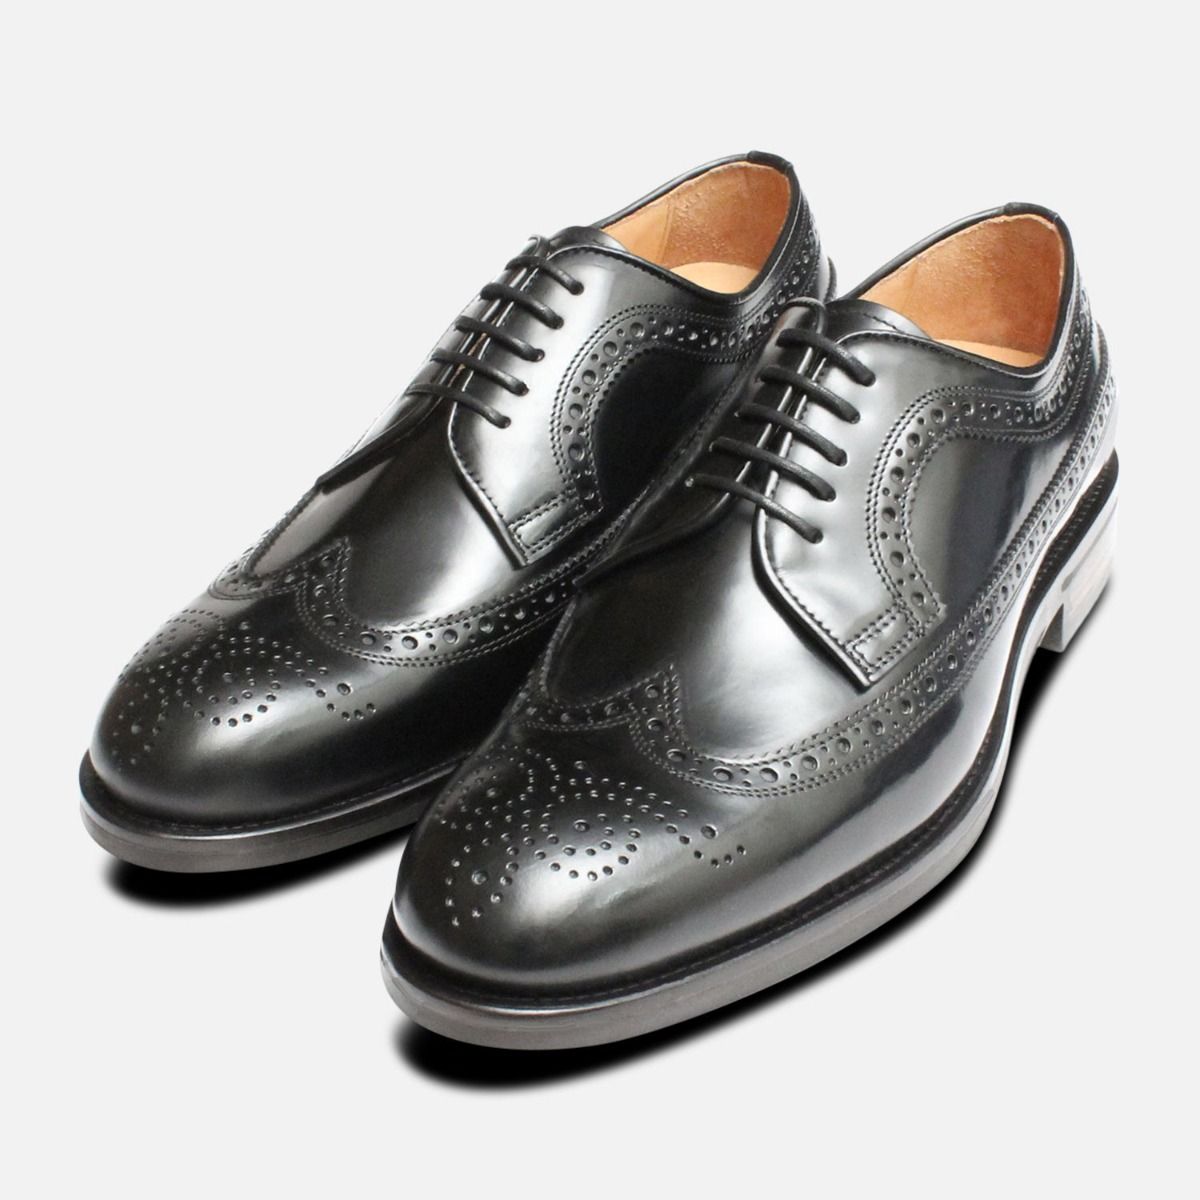 white and black brogues